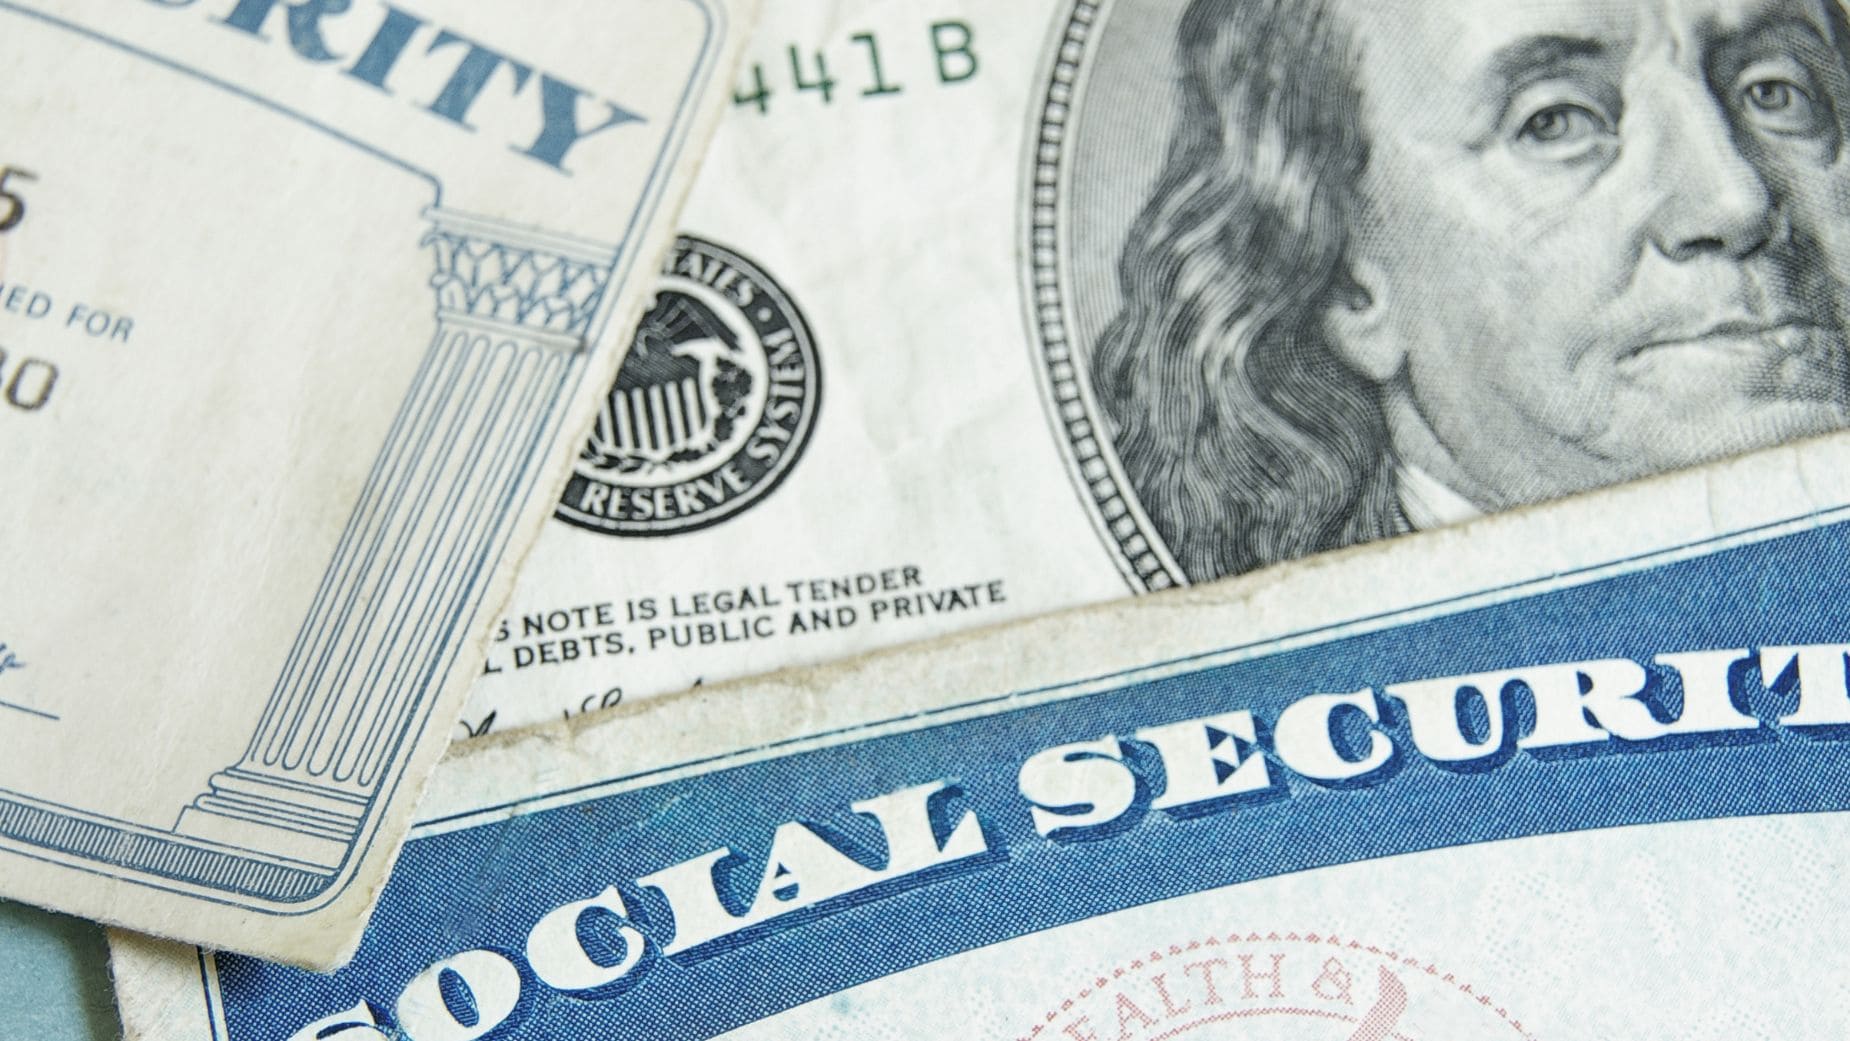 You can get a Social Security payment in the next days